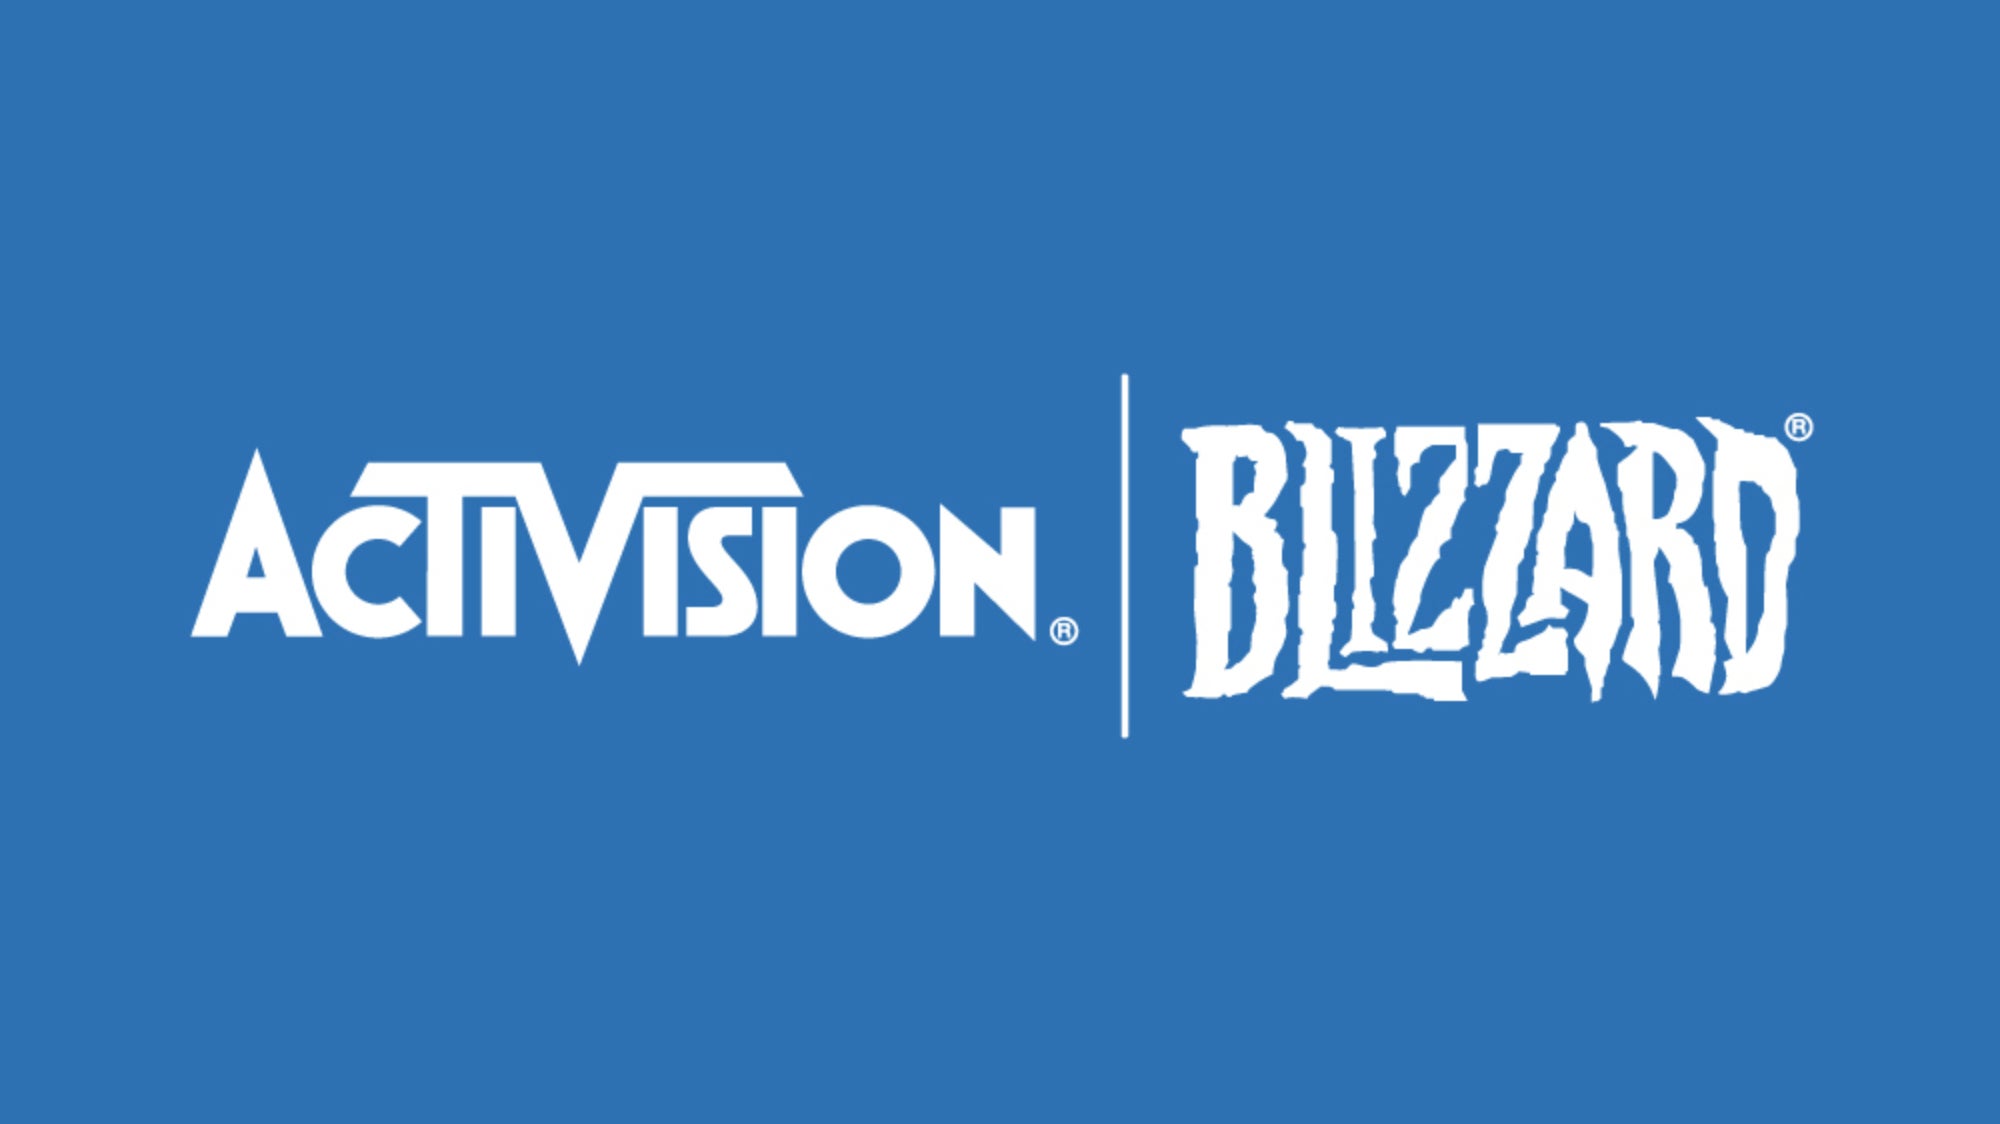 Image for Activision Blizzard employees form anti-discrimination committee for worker rights